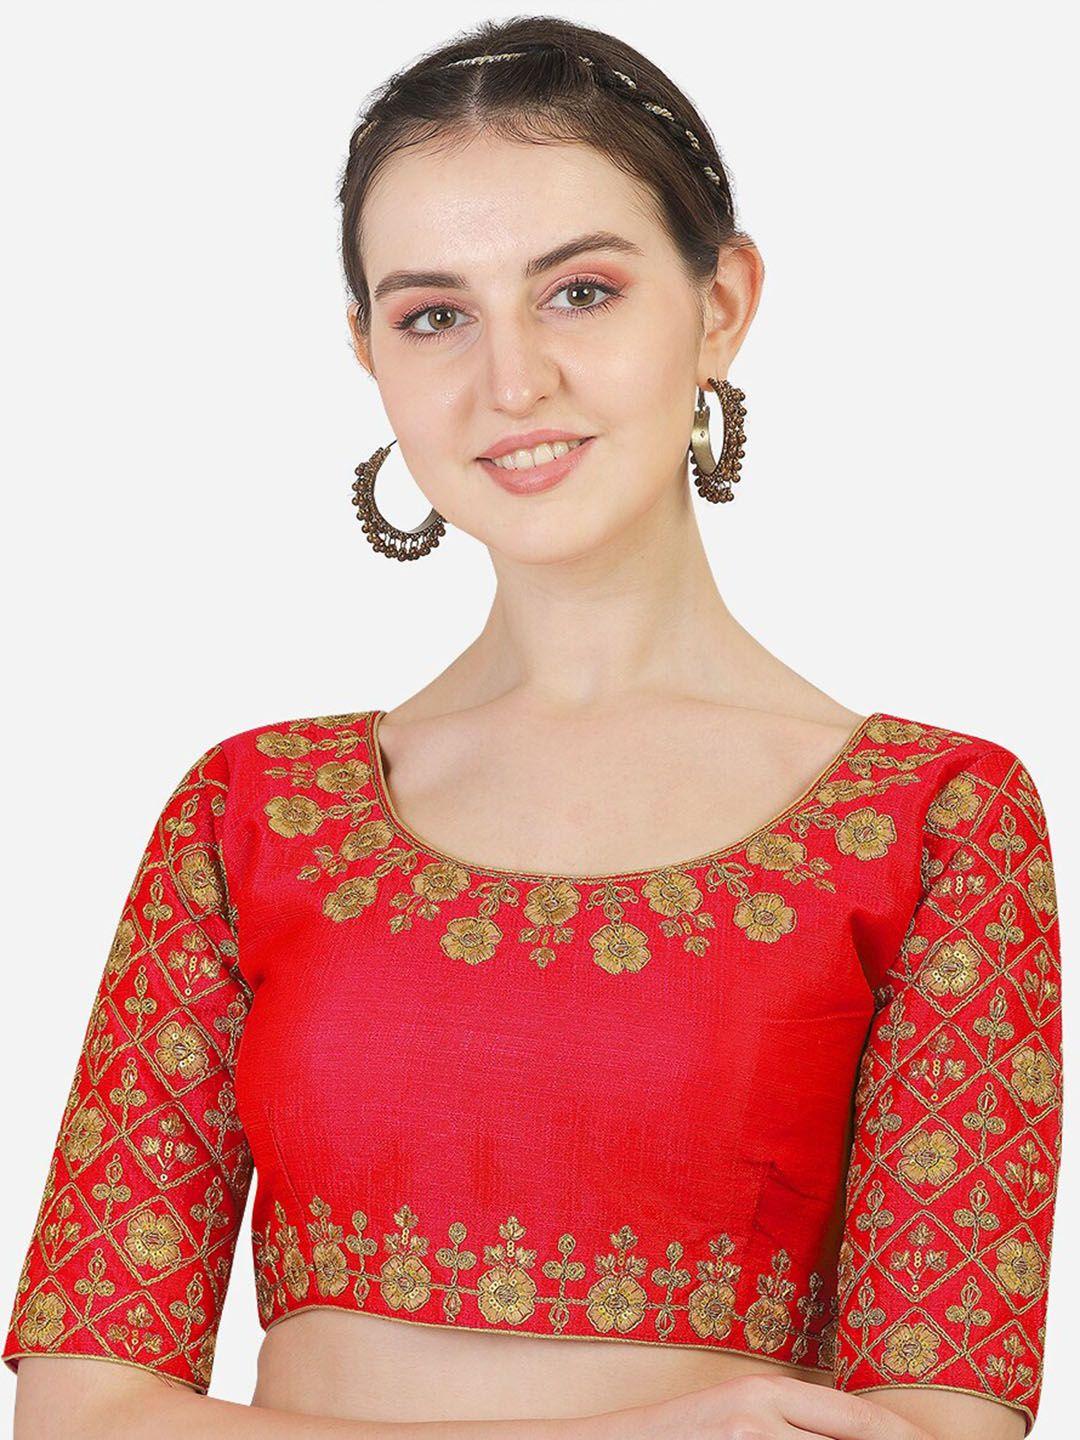 pujia mills red & gold-coloured embroidered saree blouse